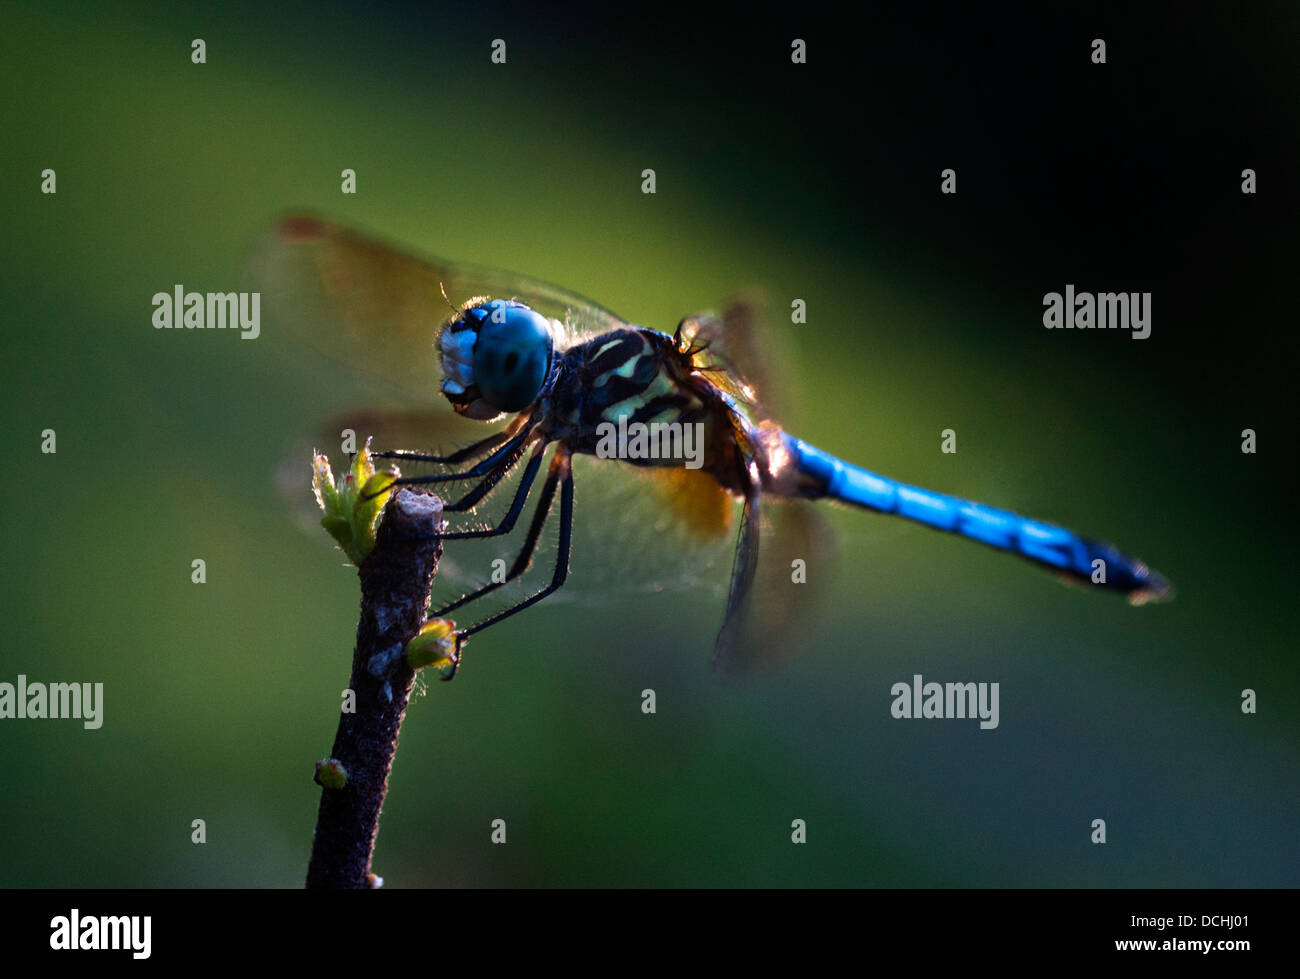 Dragonfly macro photograph in low light Stock Photo